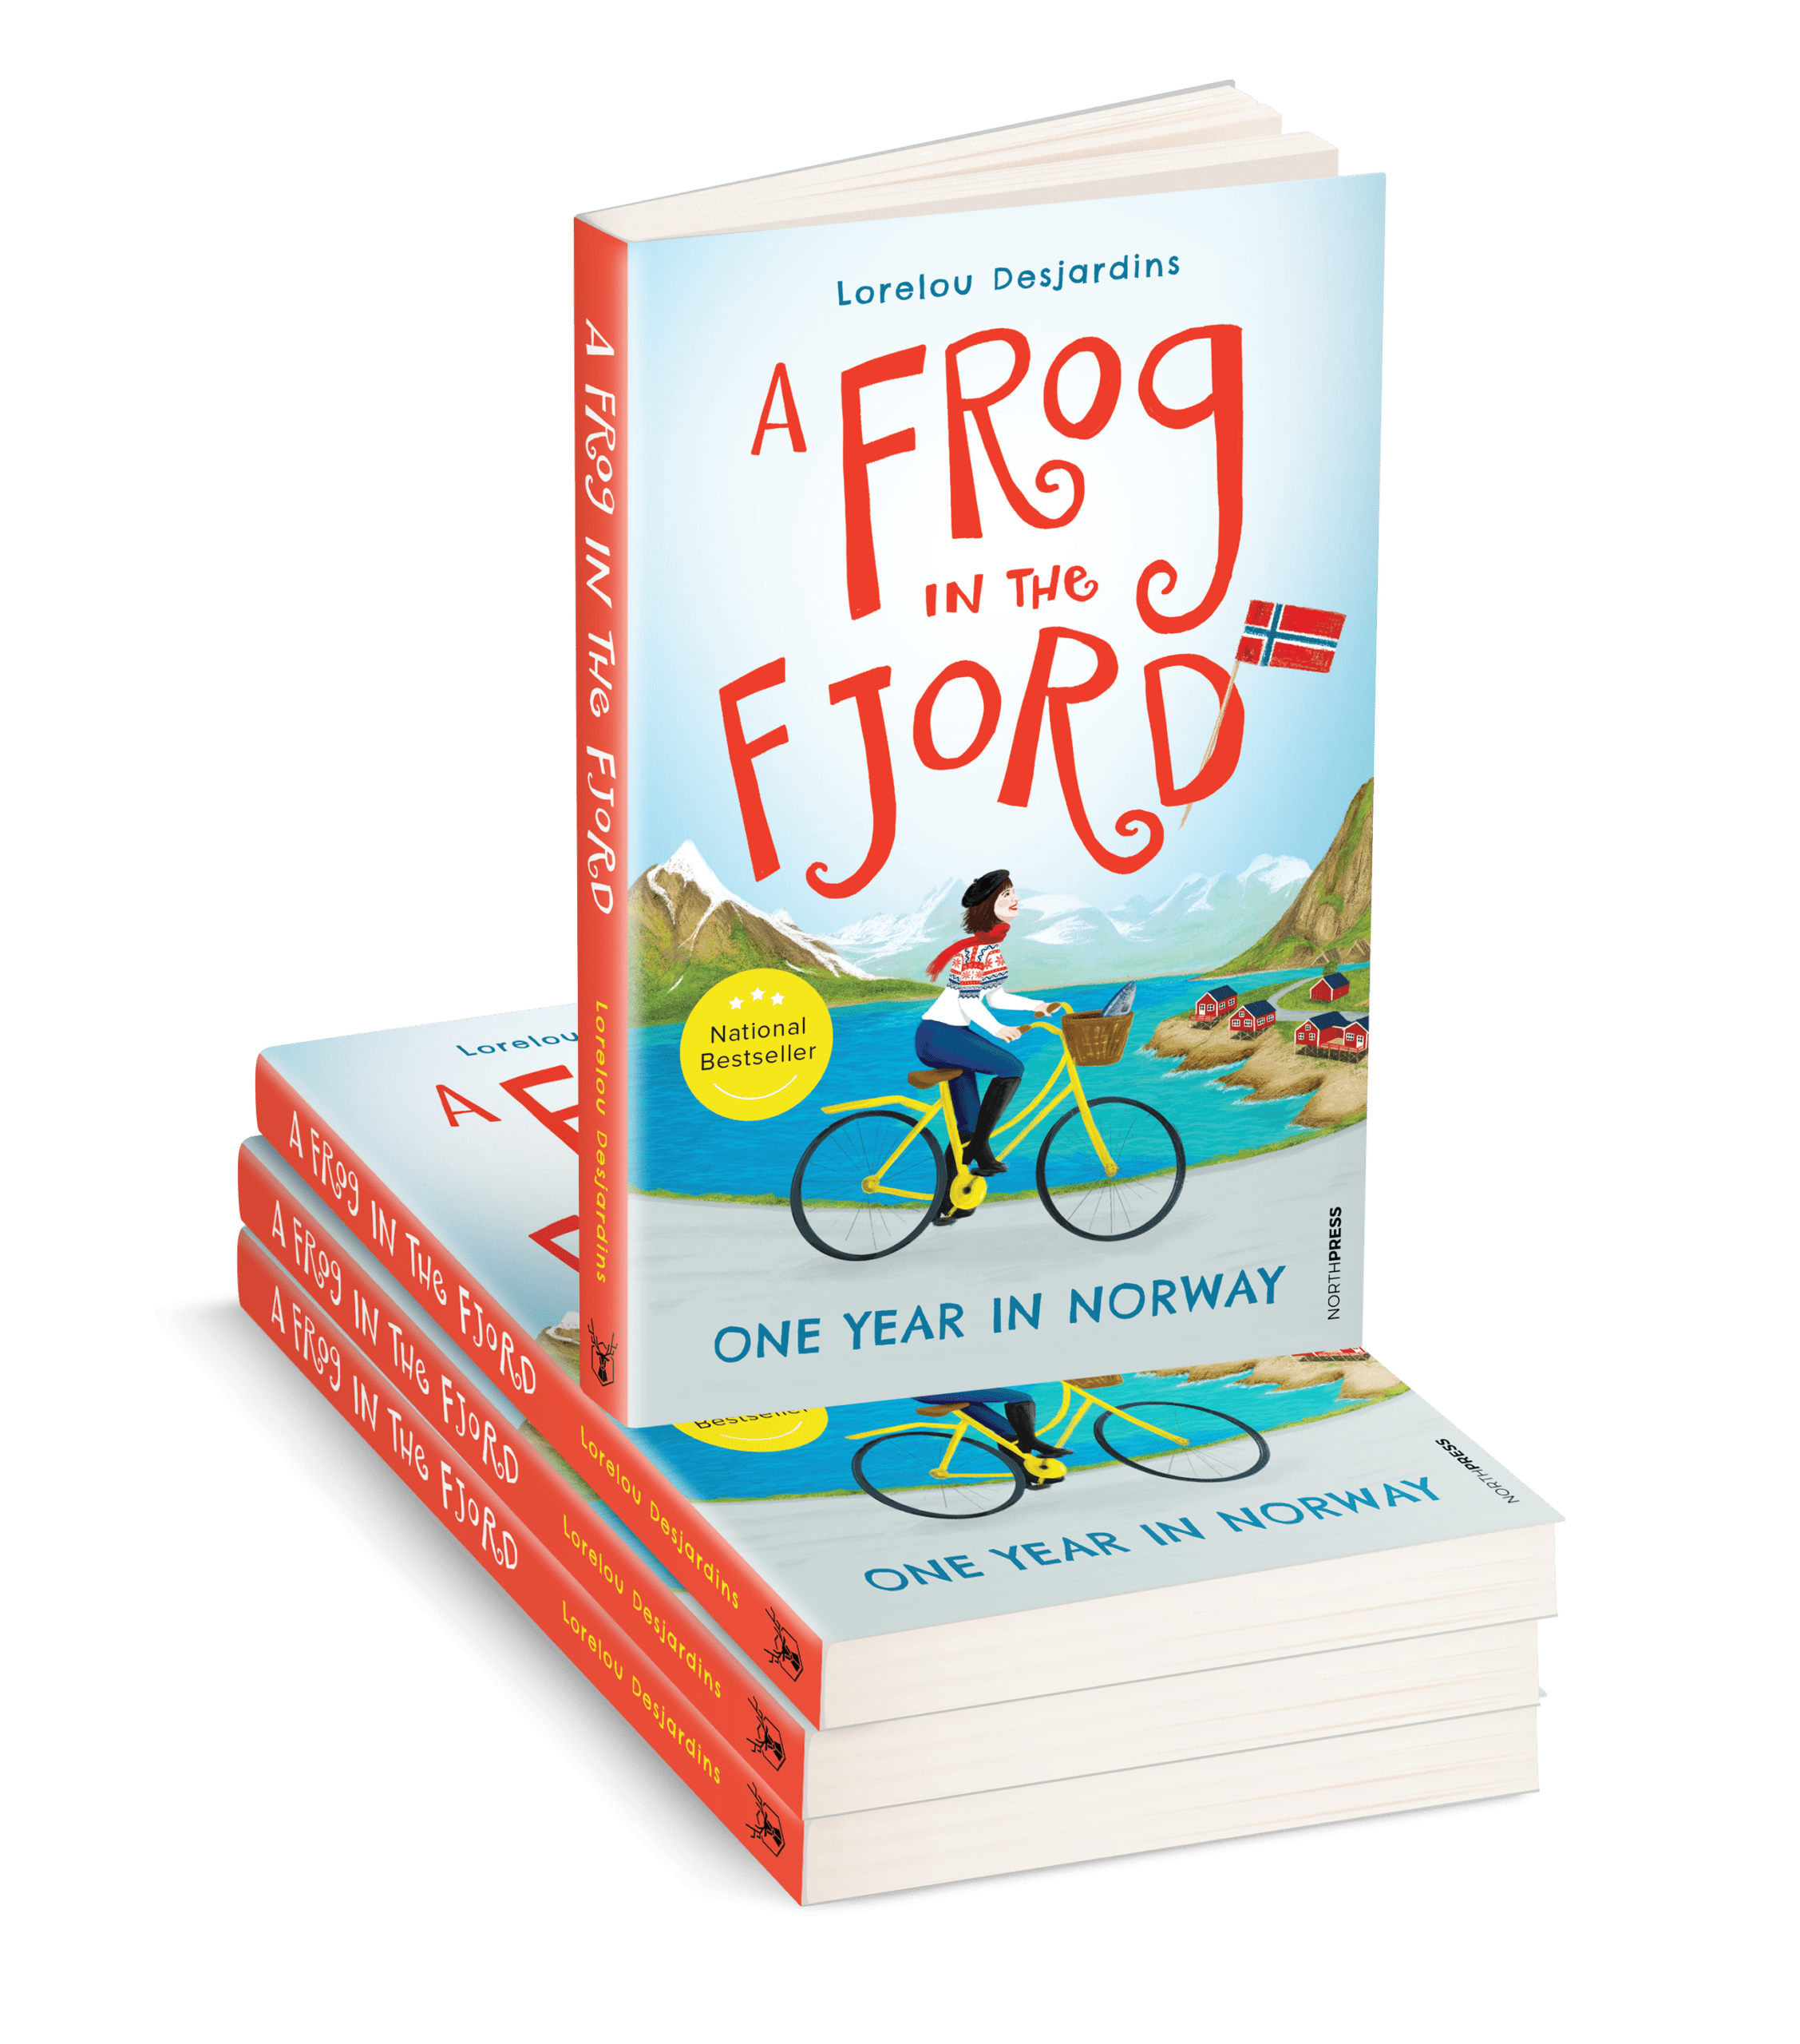 Excerpt from “A Frog in the Fjord – One Year in Norway” Book